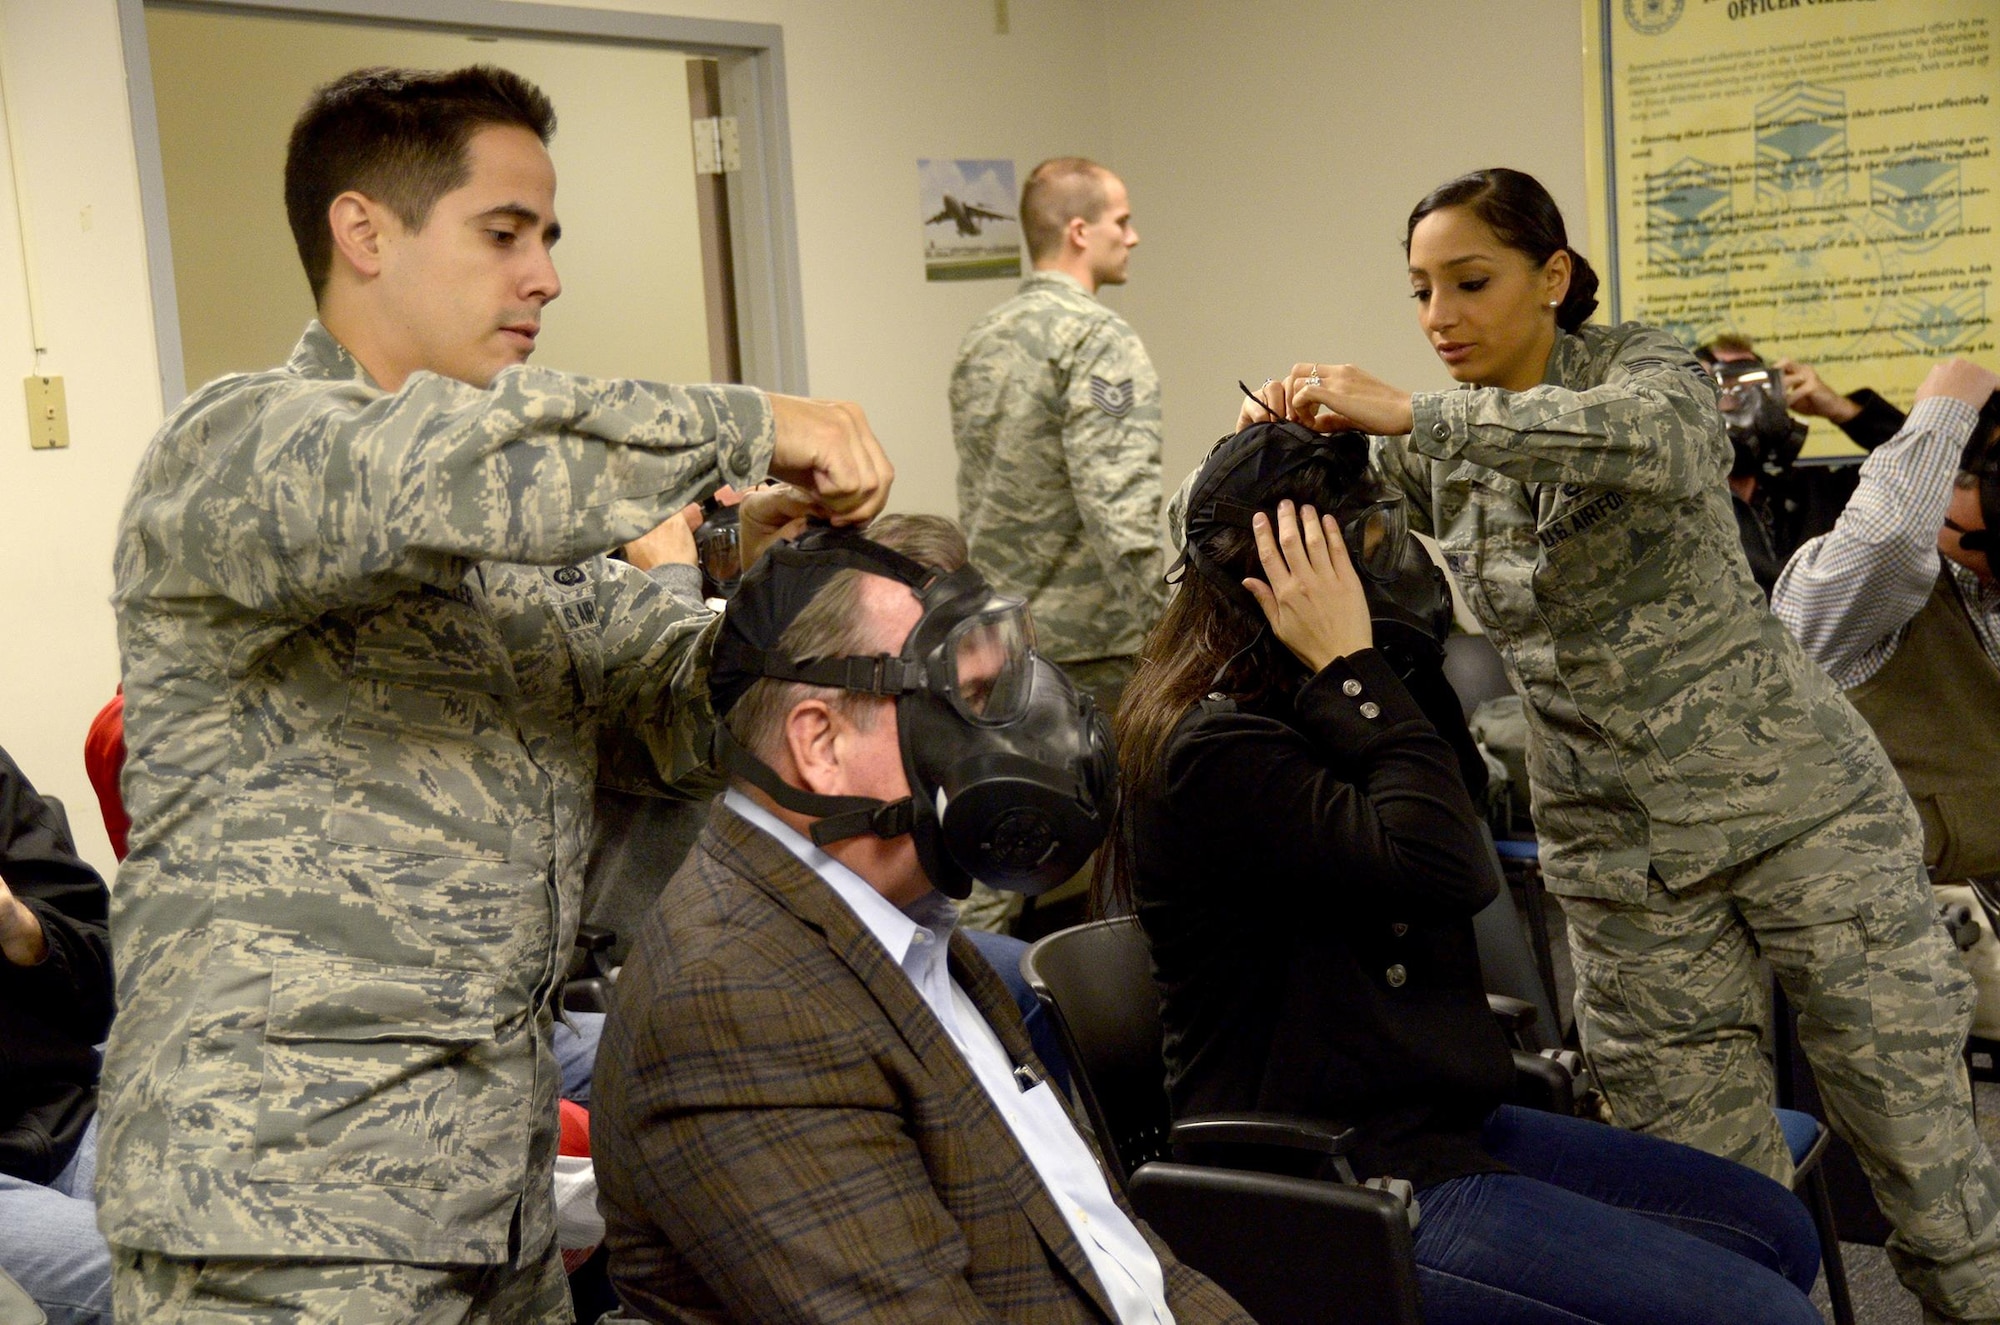 Maj. Jason Miller, 445th Force Support Squadron commander, and Senior Airman Jowanda Ayoub, 445th Maintenance Group maintenance scheduler, help their employers don chemical warfare masks during the civil engineer demonstration that was part of the 445th Airlift Wing Employers Day Nov. 5, 2016. Approximately 70 employers and 35 reservists enjoyed breakfast and lunch, received a C-17 Globemaster III flight, participated in tours and demonstrations of the different jobs and training that their Air Force Reserve employees do when performing military service. The employers also received information about the Employer Support of the Guard and Reserve program. (U.S. Air Force photo/Staff Sgt. Joel McCullough)